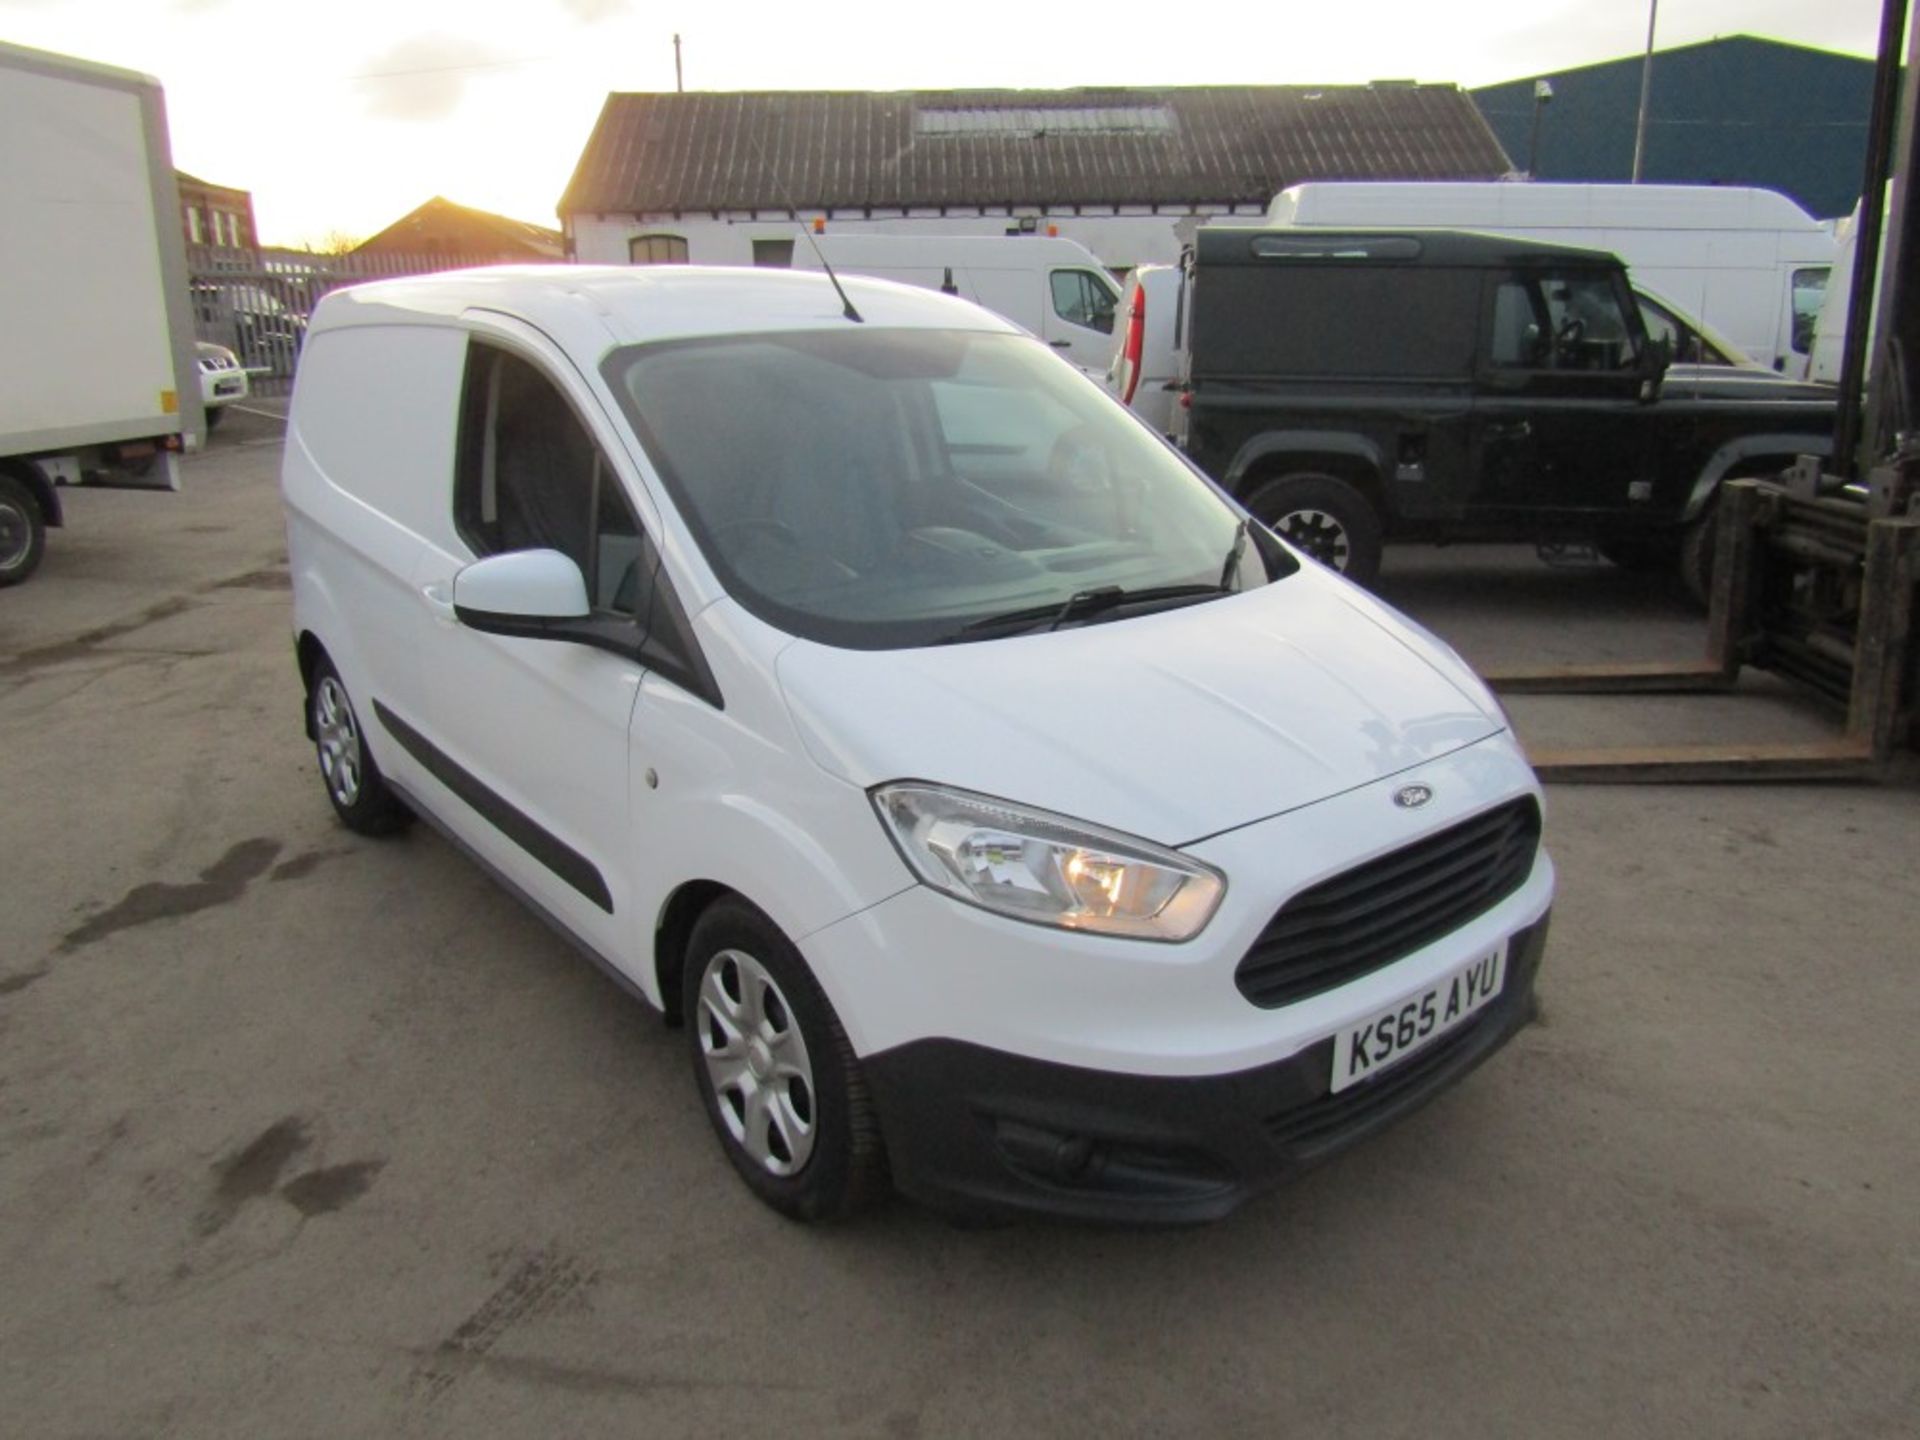 65 reg FORD TRANSIT COURIER TREND TDCI, PLY LINING, BLUETOOTH, 4 SERVICE BOOK STAMPS, 1ST REG